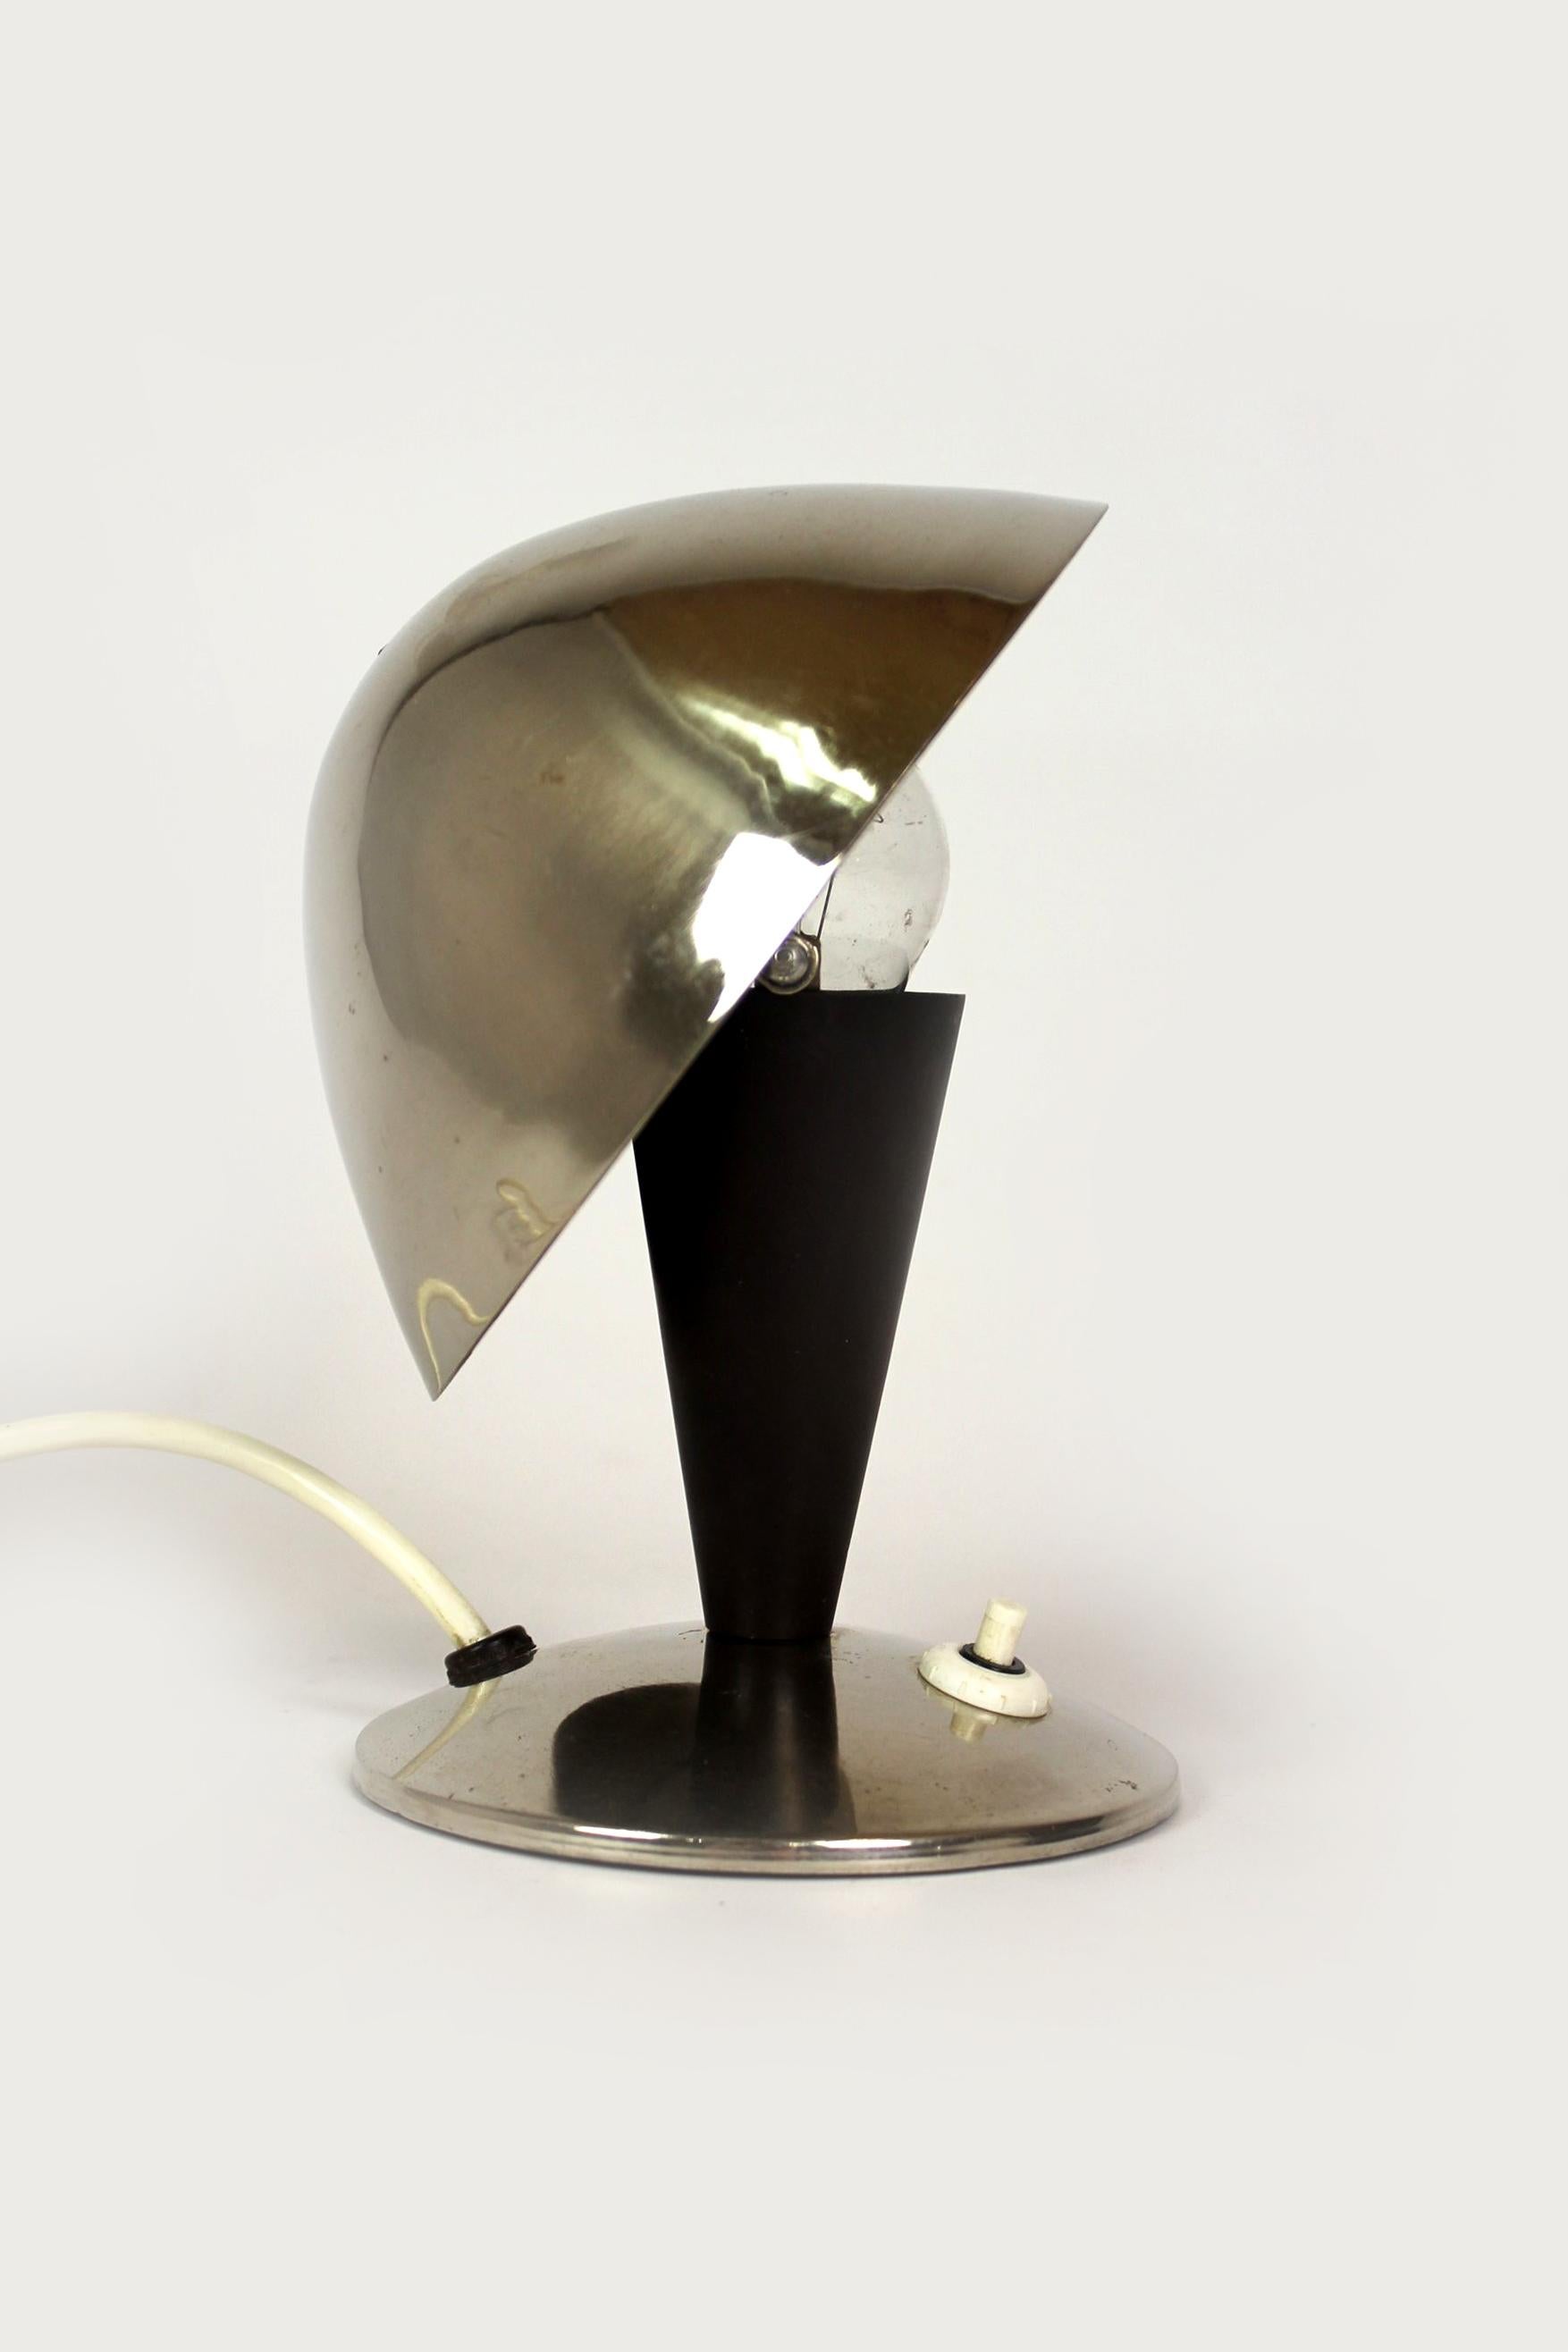 This Bauhaus style table lamp was produced by ESC in the 1940s in Czechoslovakia. The lamp is in working order, preserved in original, good condition with a visible patina.